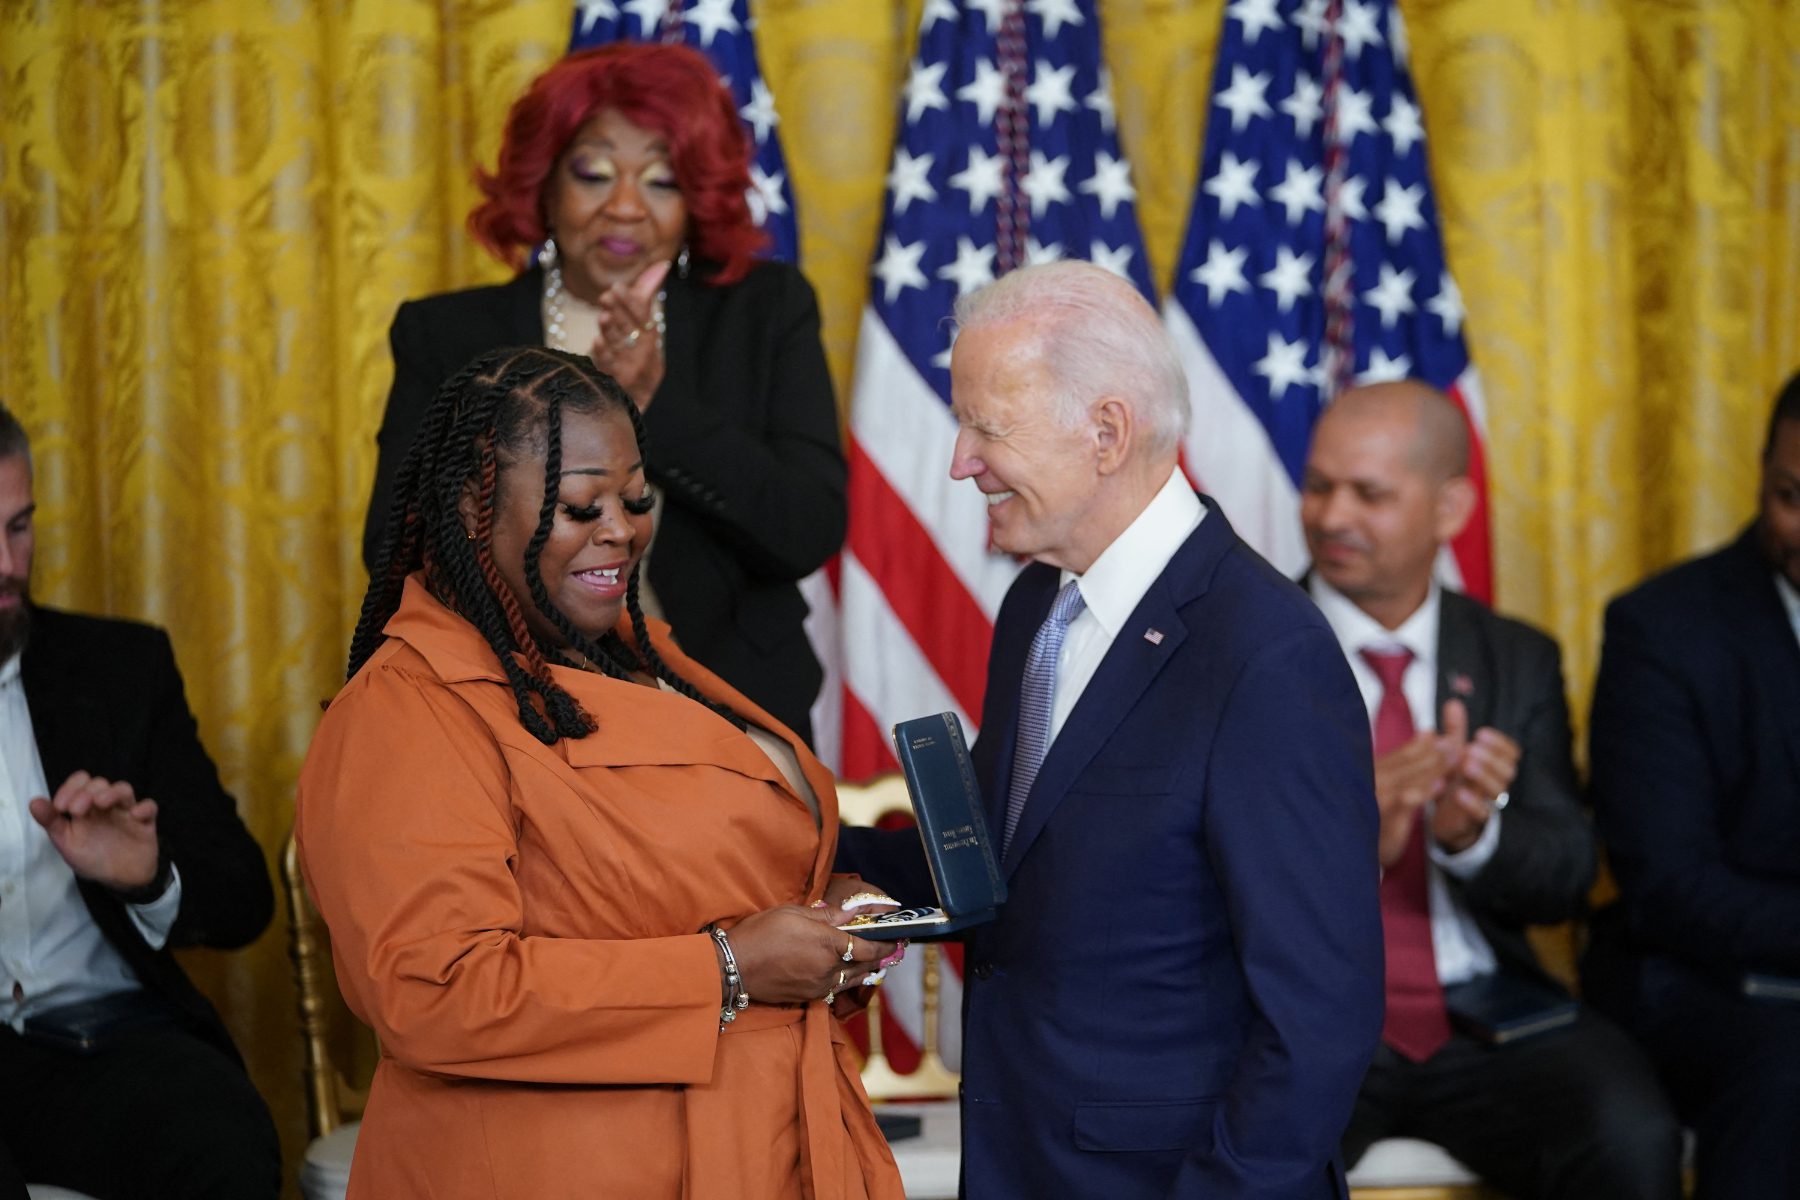 Shaye Moss, election worker from Fulton County, Ga., receives the President Citizens Medal from President Joe Biden for her work upholding the 2020 presidential election